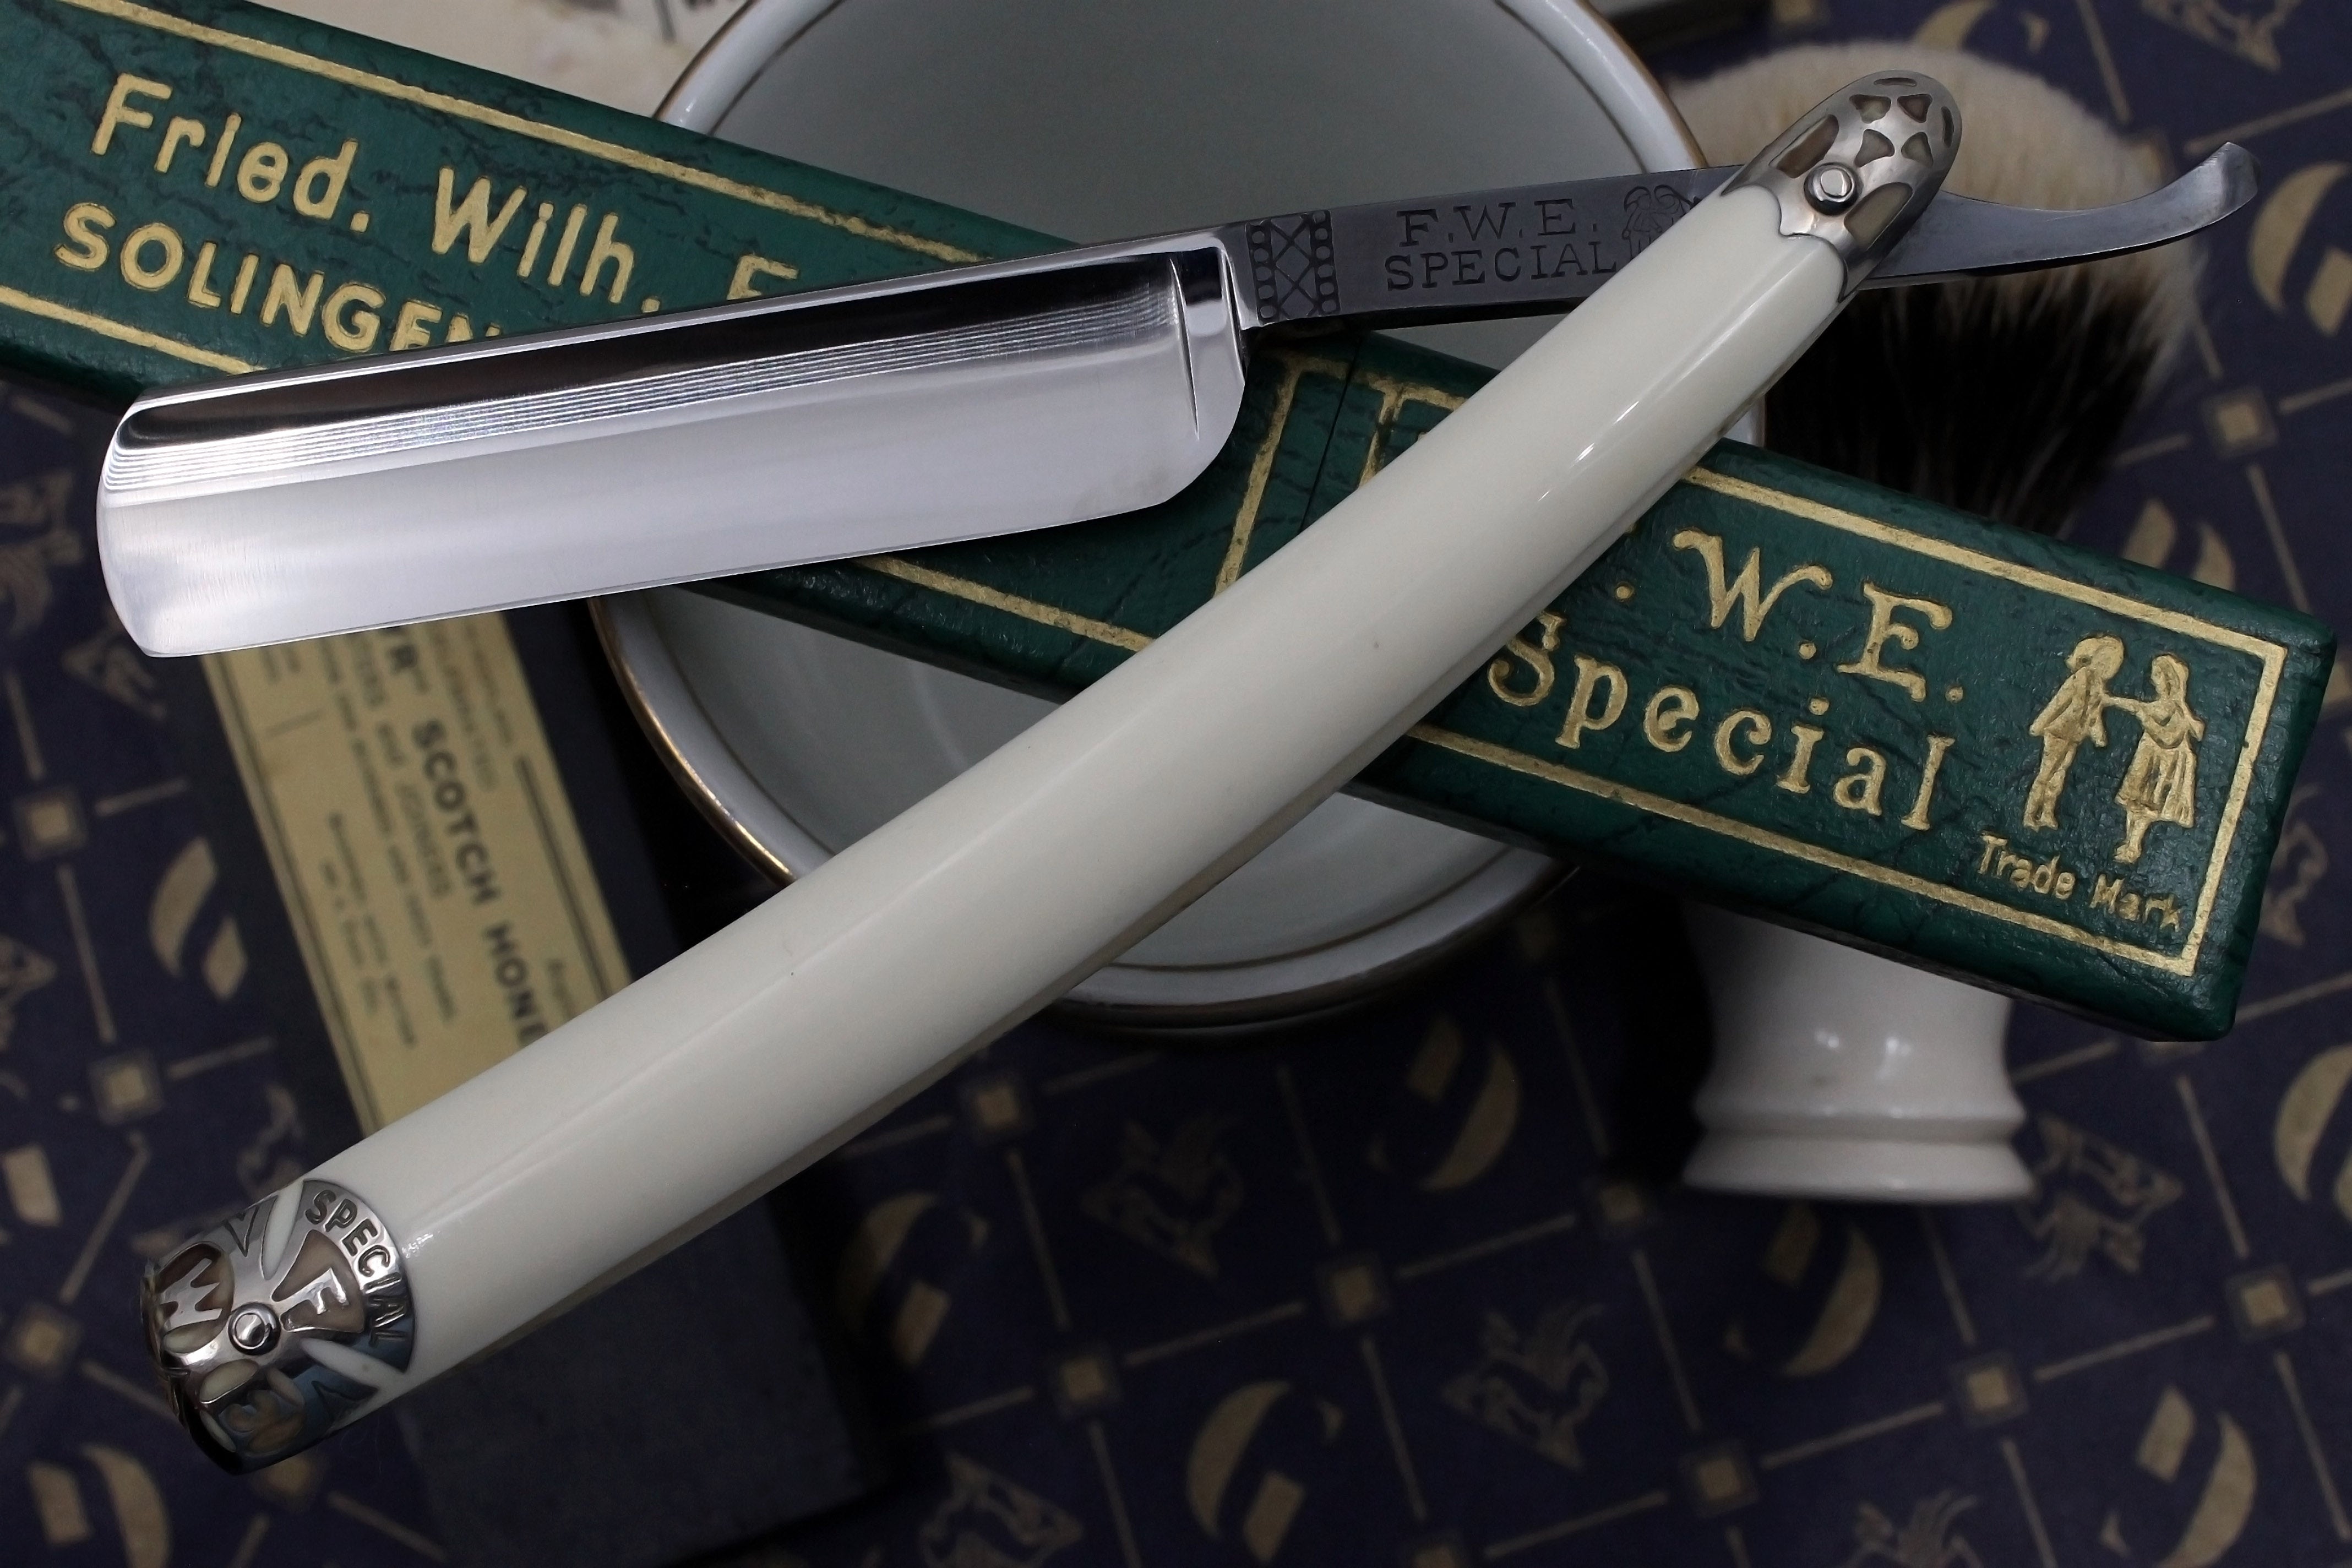 F.W. Engels "FWE Special" - 13/16 Full Hollow Blade - Near Mint Restored Vintage Solingen Straight Razor - Shave Ready